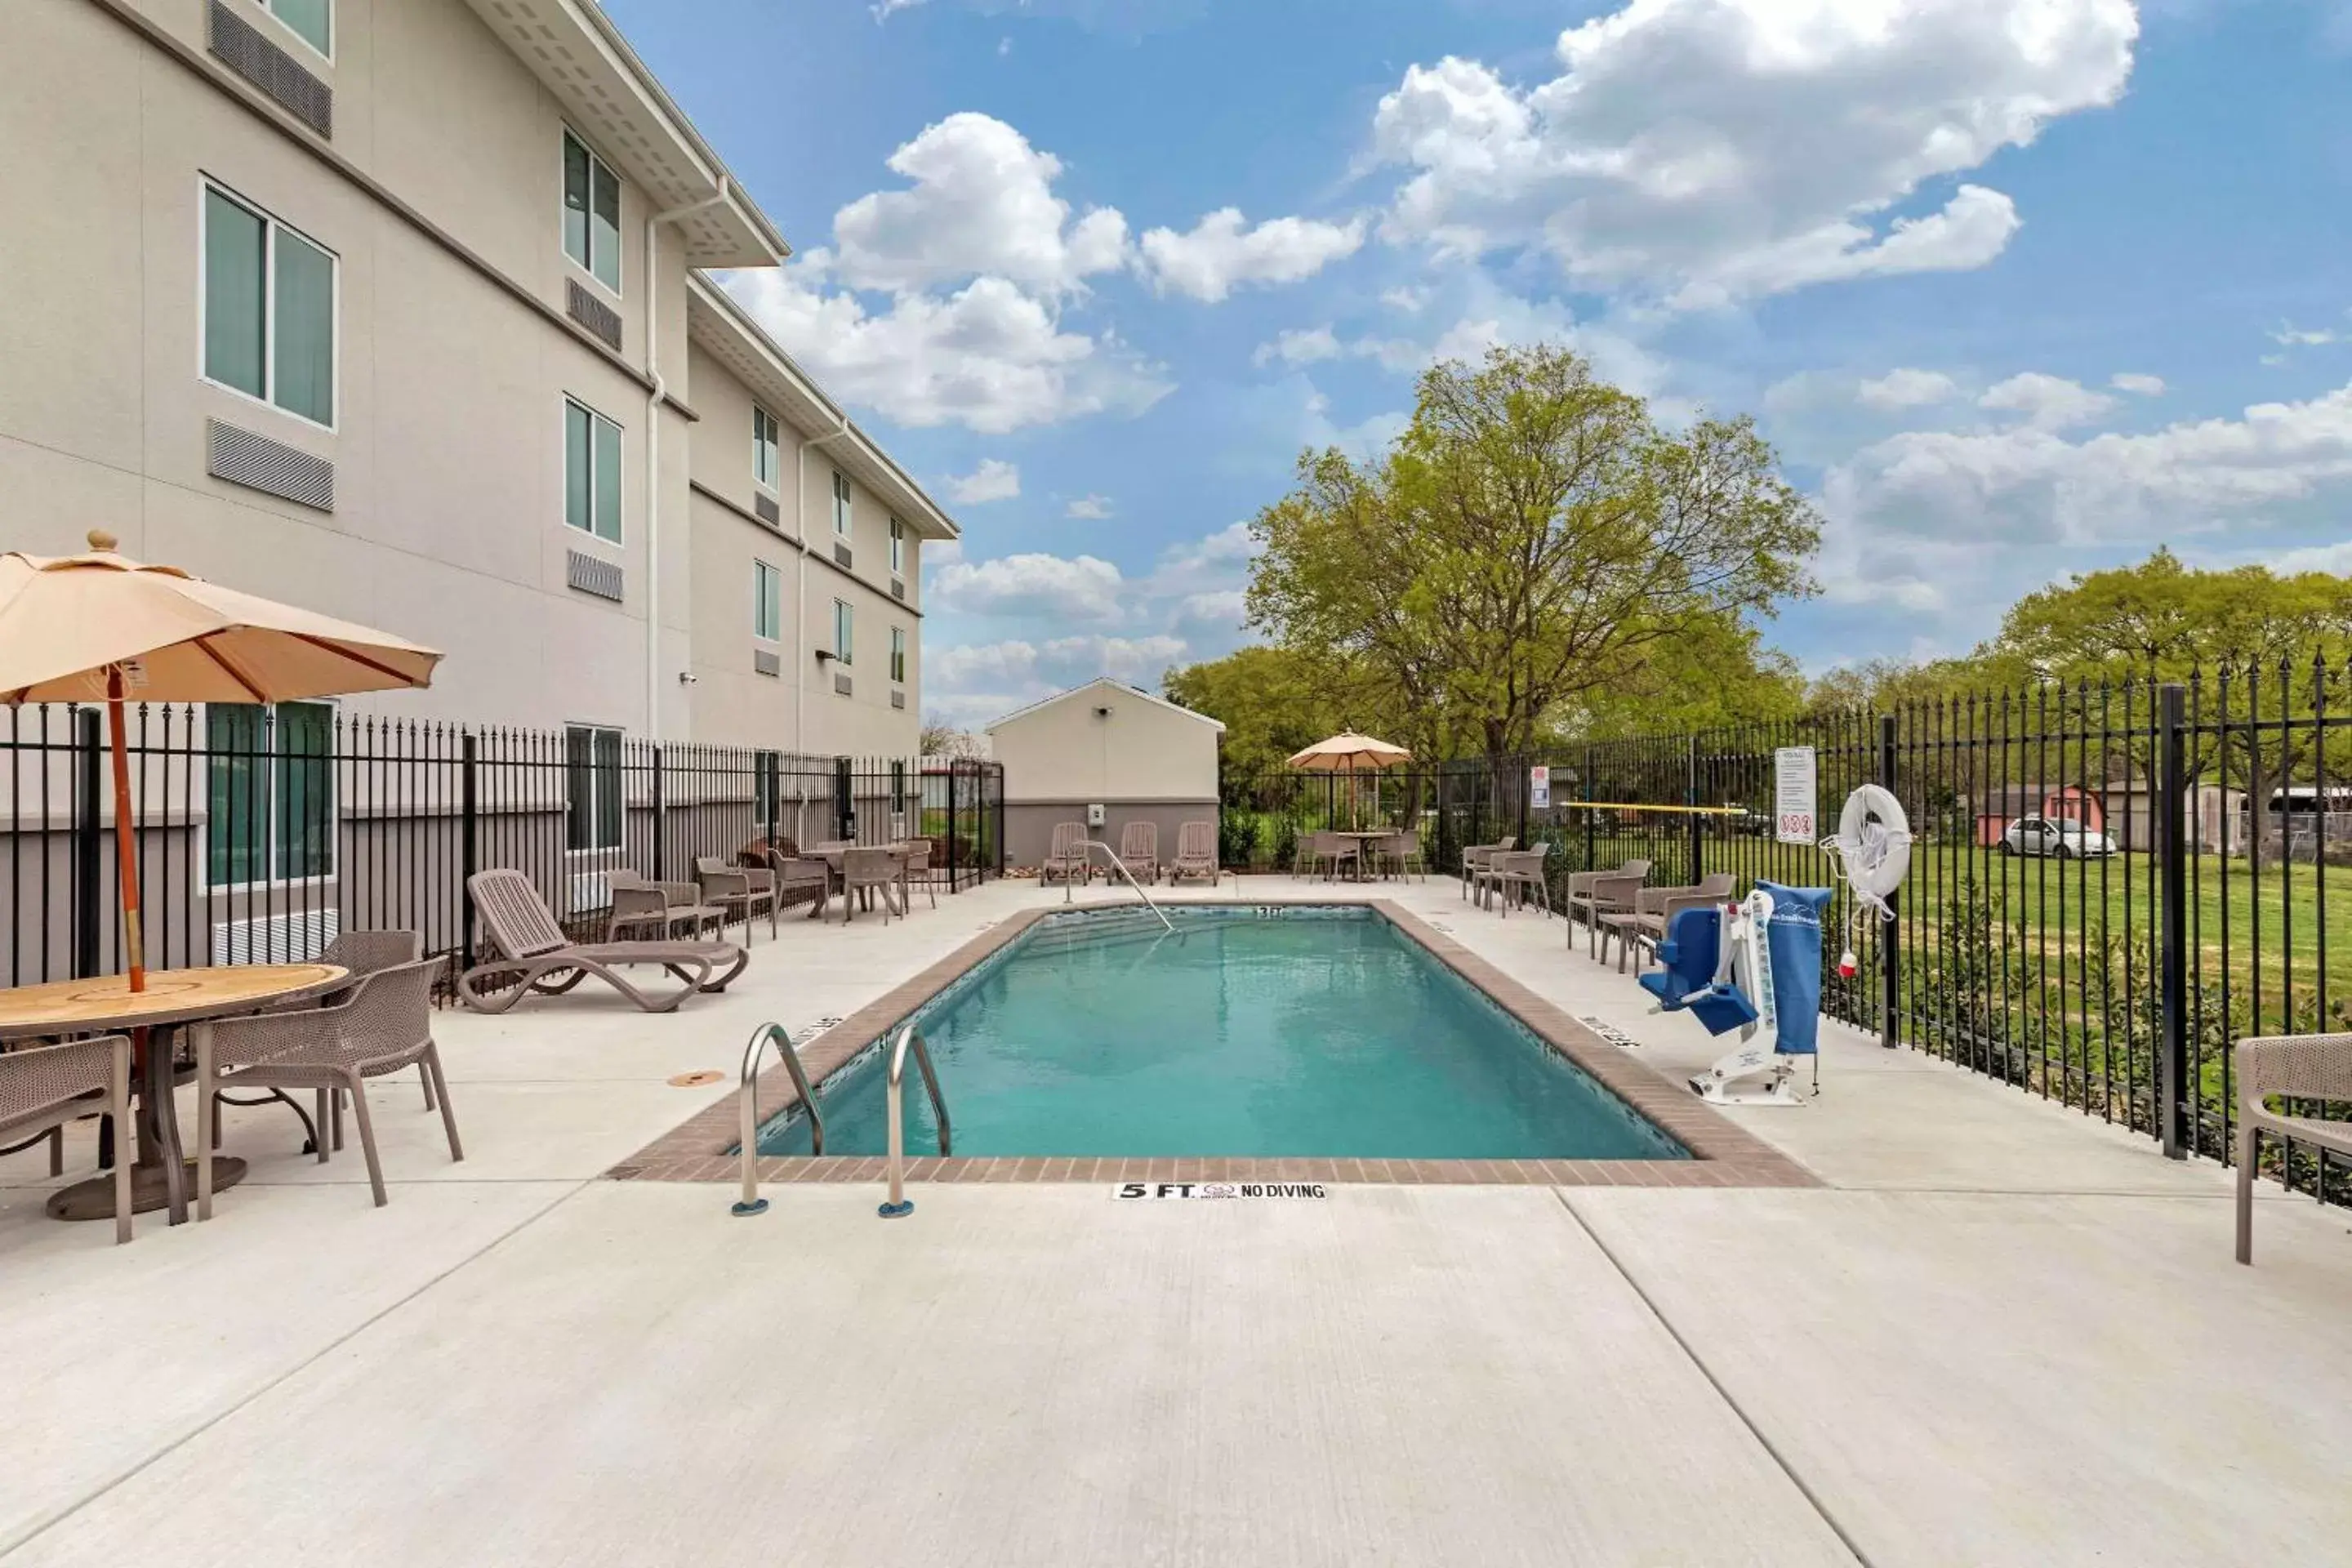 On site, Swimming Pool in MainStay Suites Lancaster Dallas South